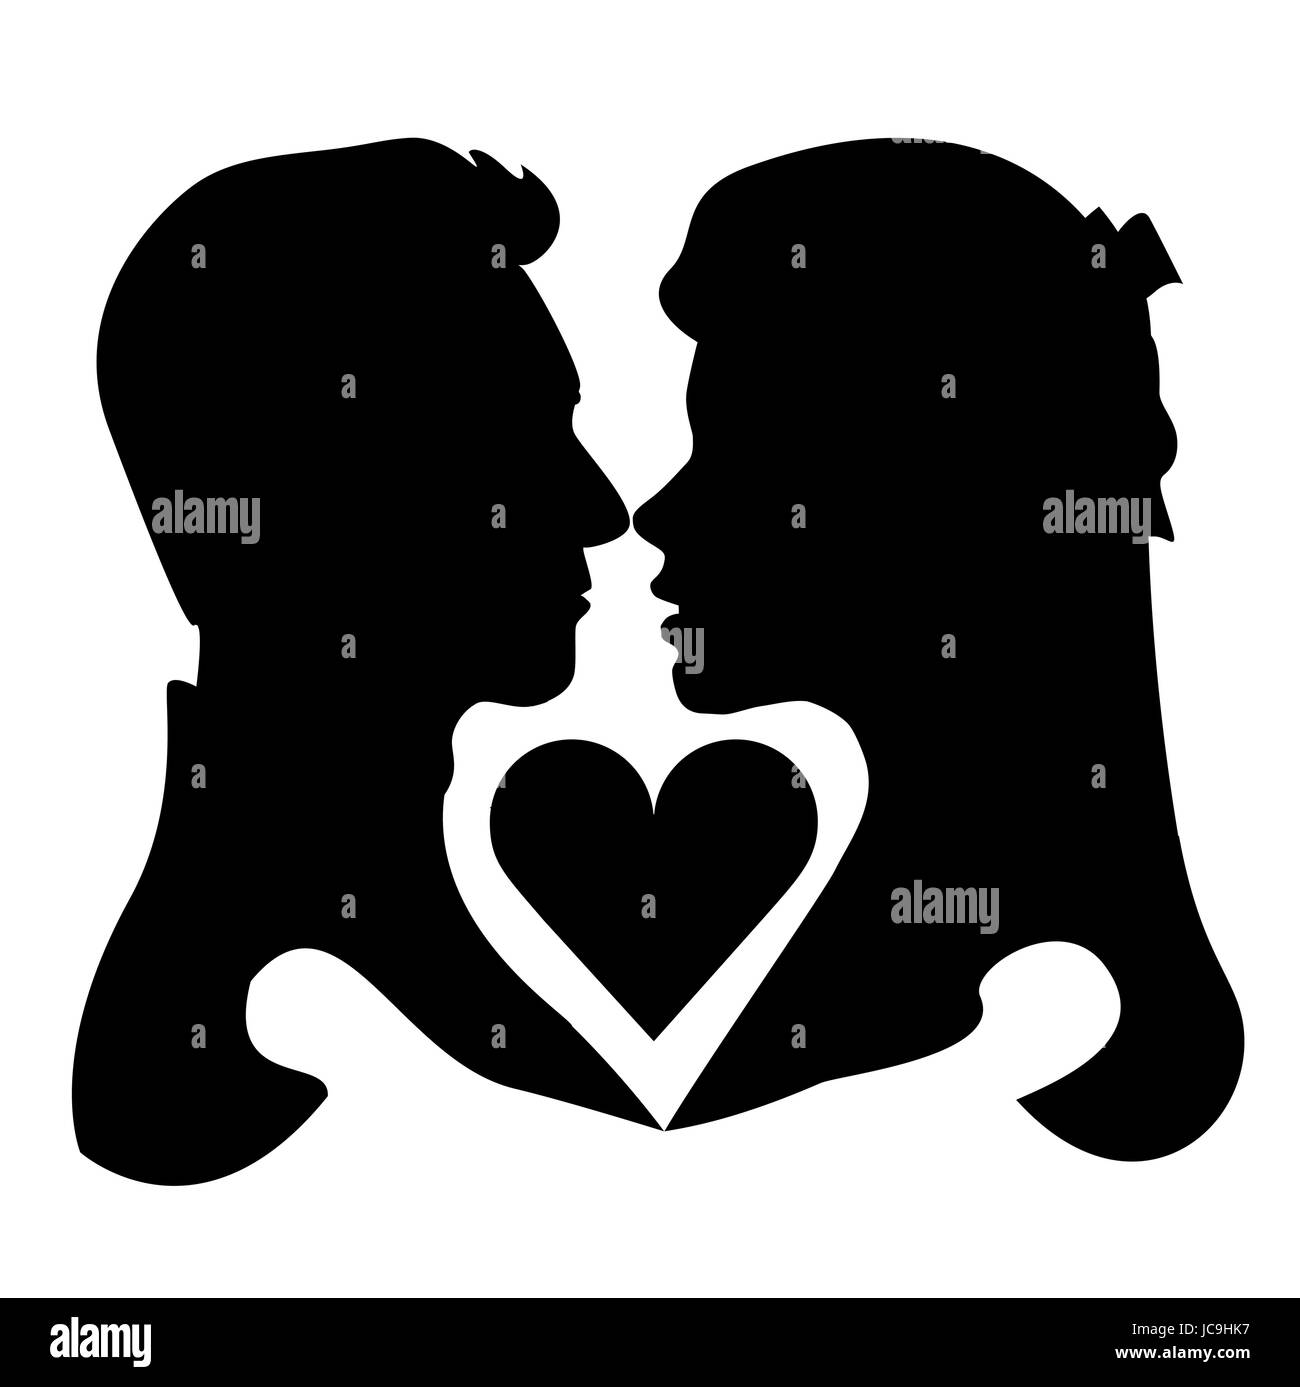 Beautiful woman face silhouette heart Stock Vector Images - Alamy